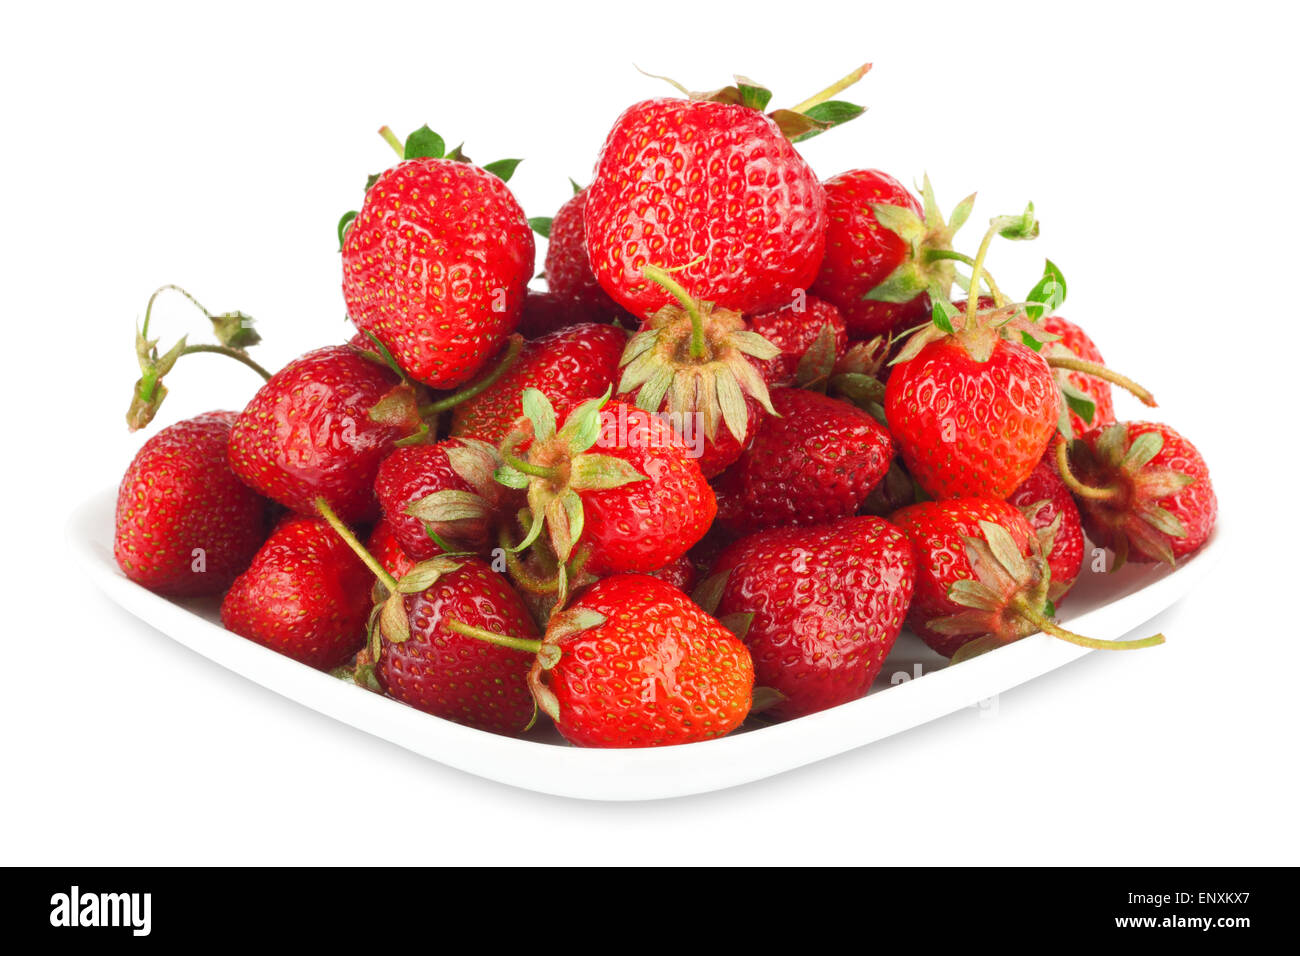 Fresh ripe strawberries on a white background isolated Stock Photo